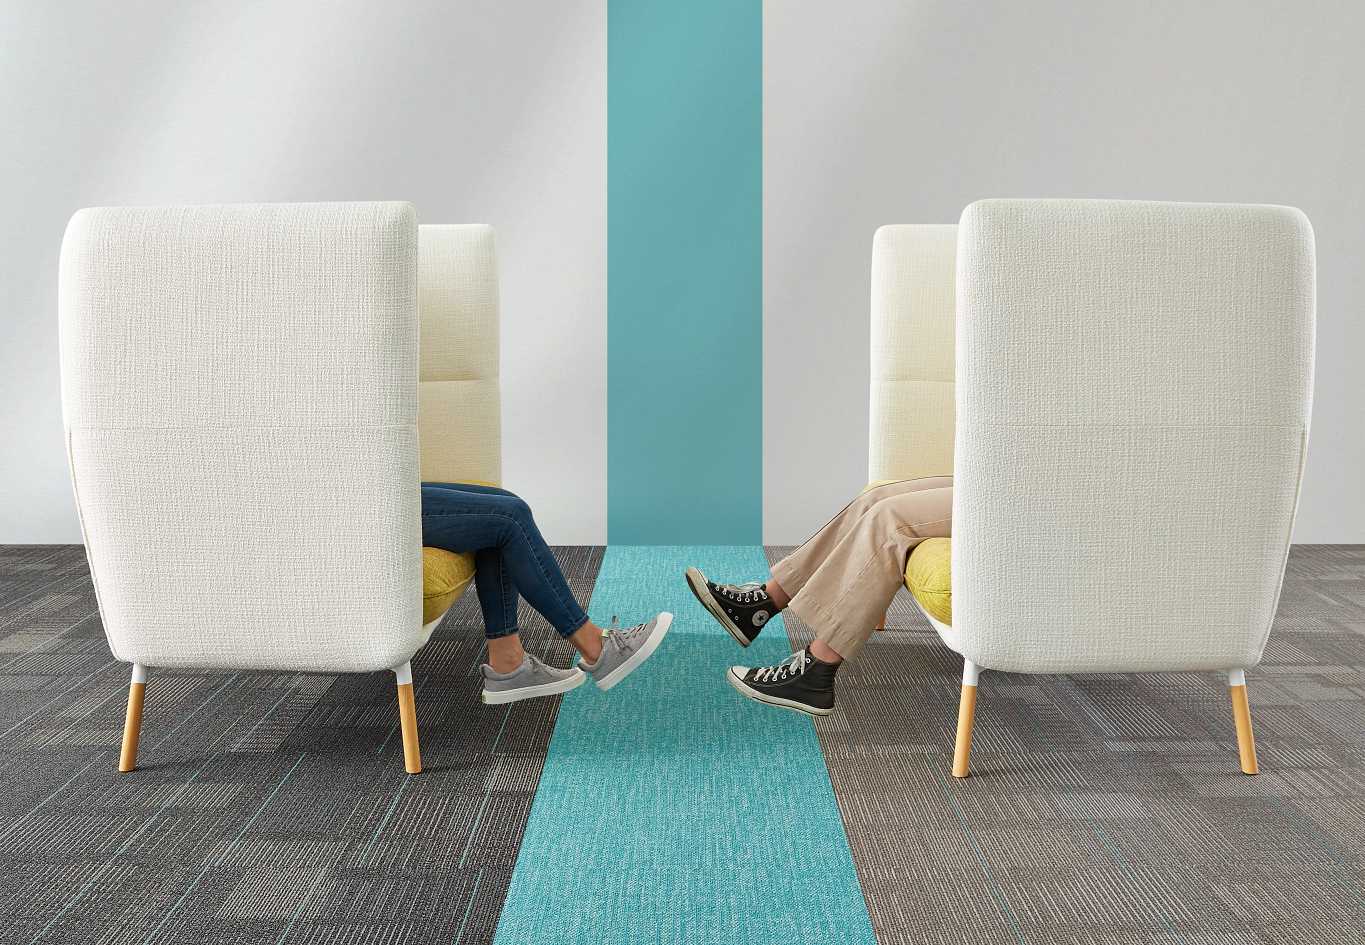 Diffuse Color in Cool Teal + Warm Teal and Color Frame in Quirky